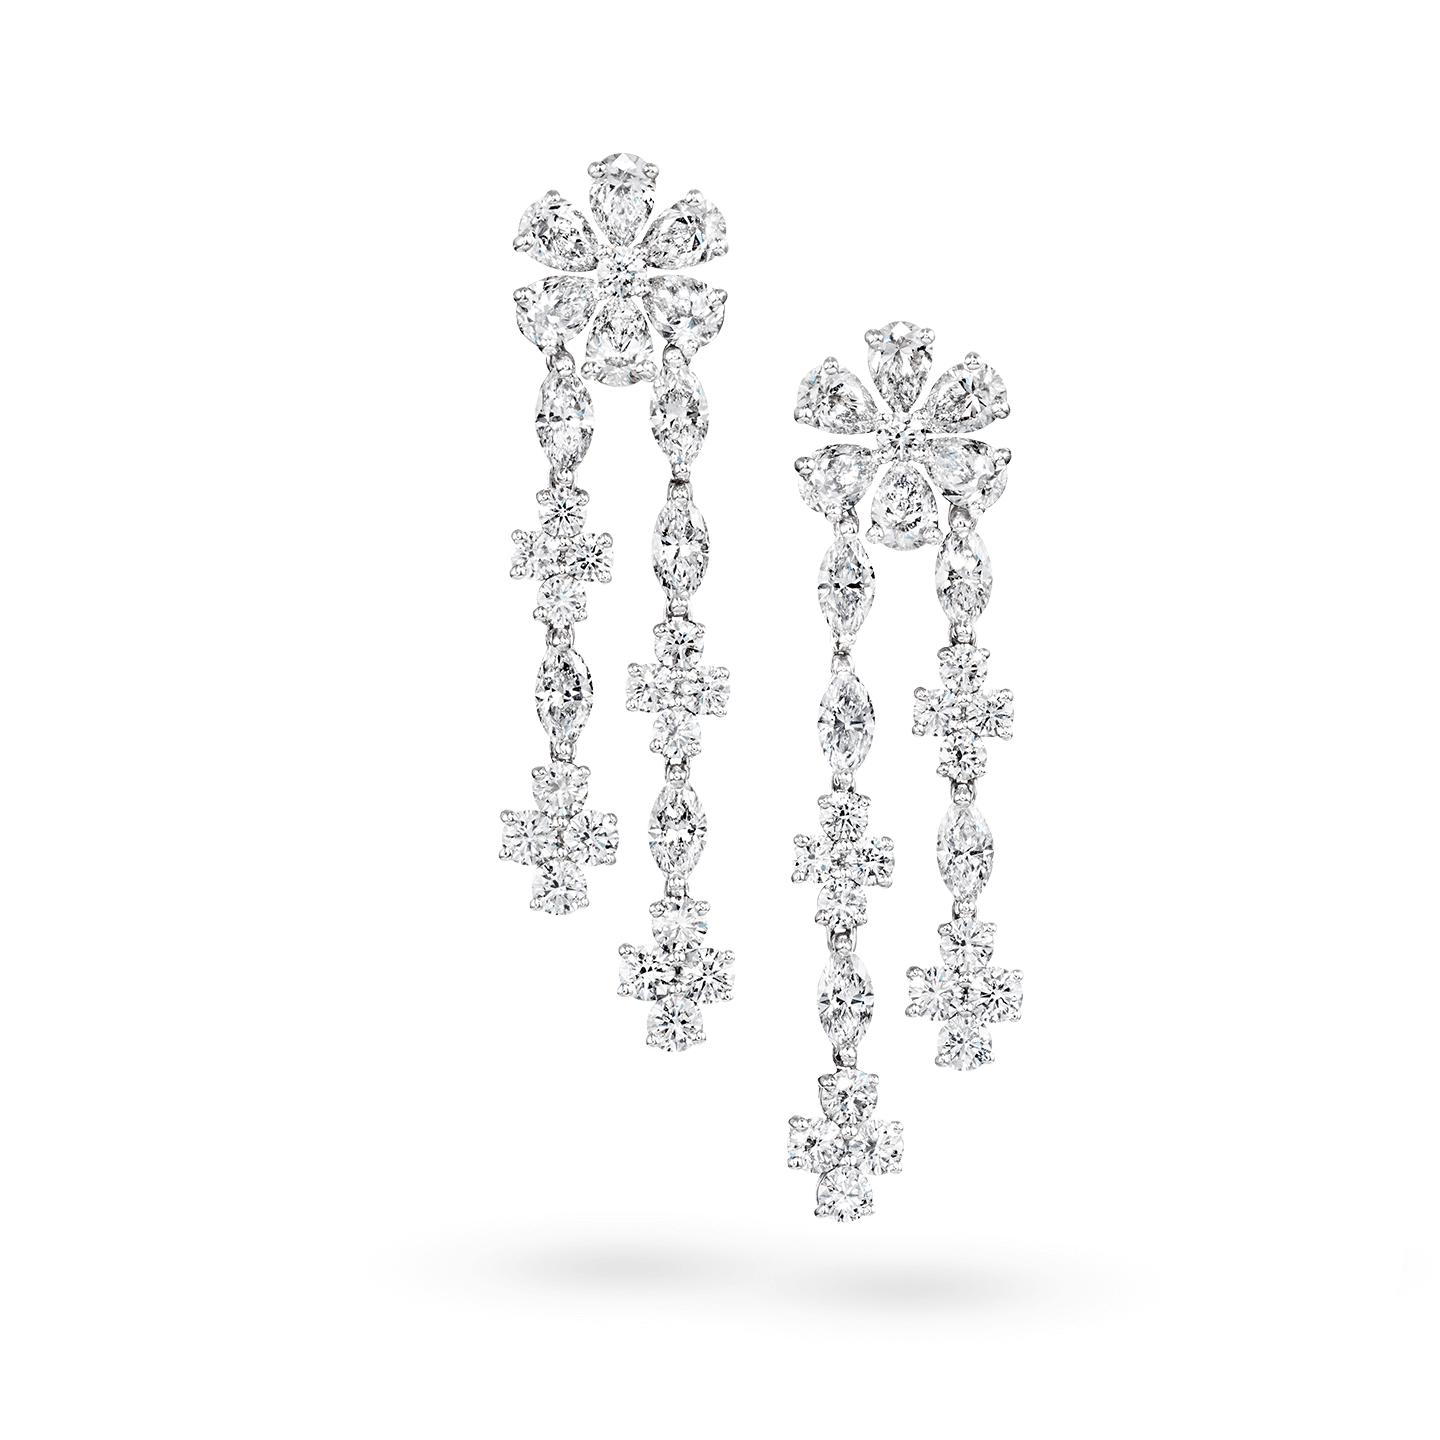 Forget-Me-Not Diamond Drop Earrings, Product Image 1